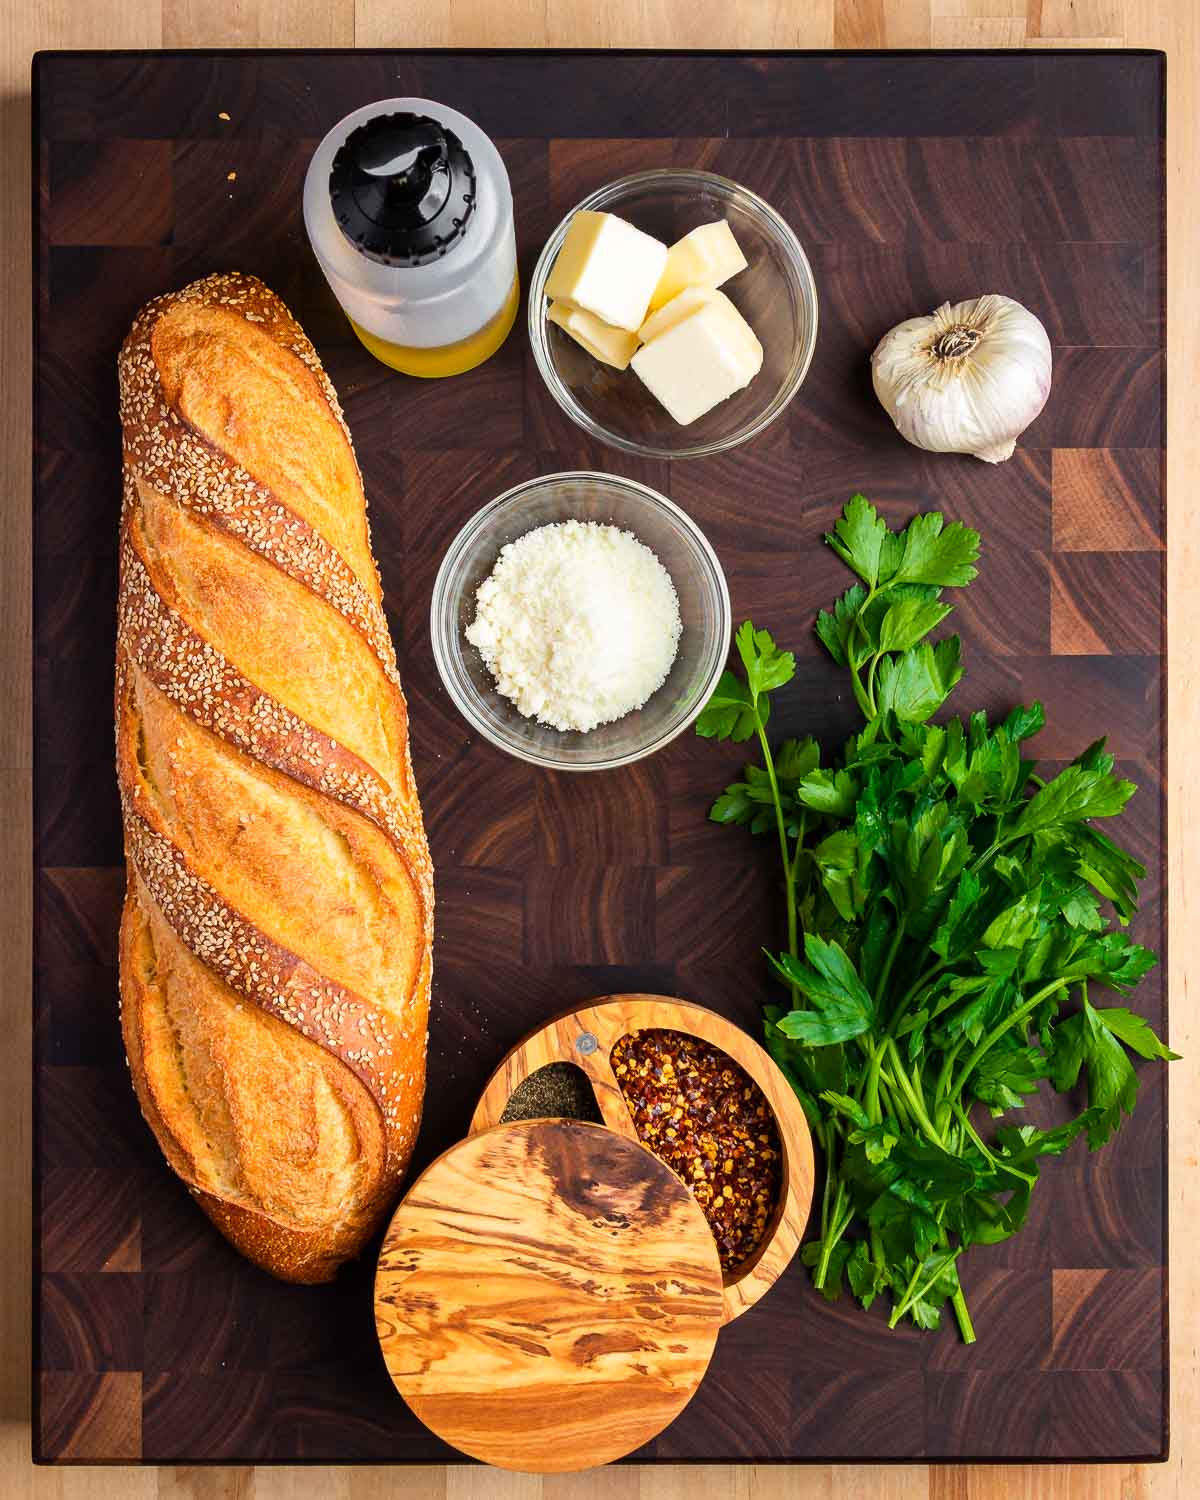 Ingredients shown: Italian bread, olive oil, butter, Pecorino, garlic, pepper, and parsley.